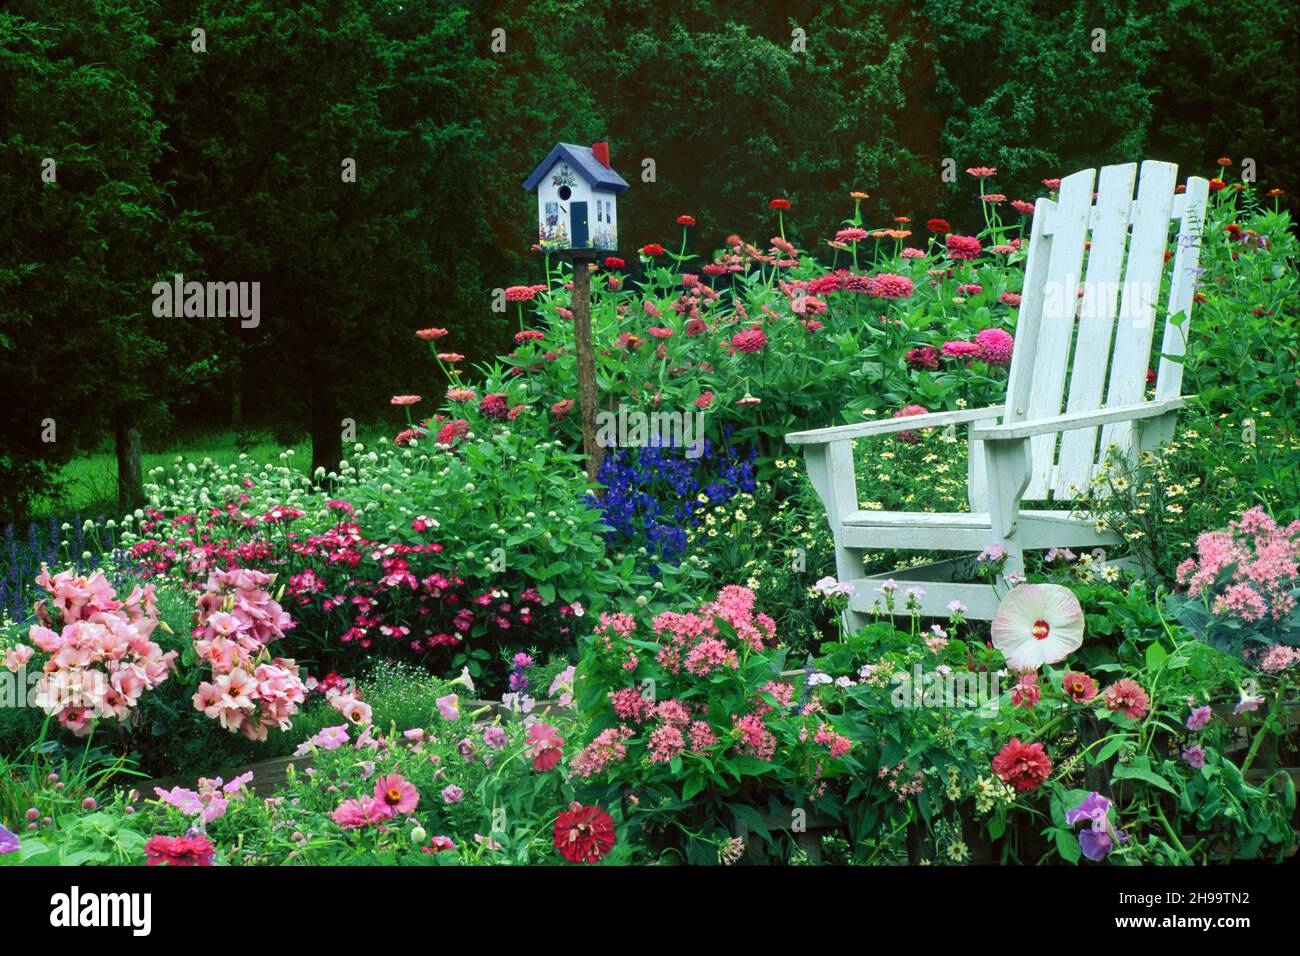 Colorful blooming garden with adirondack chair in backyard, Missouri, USA Stock Photo